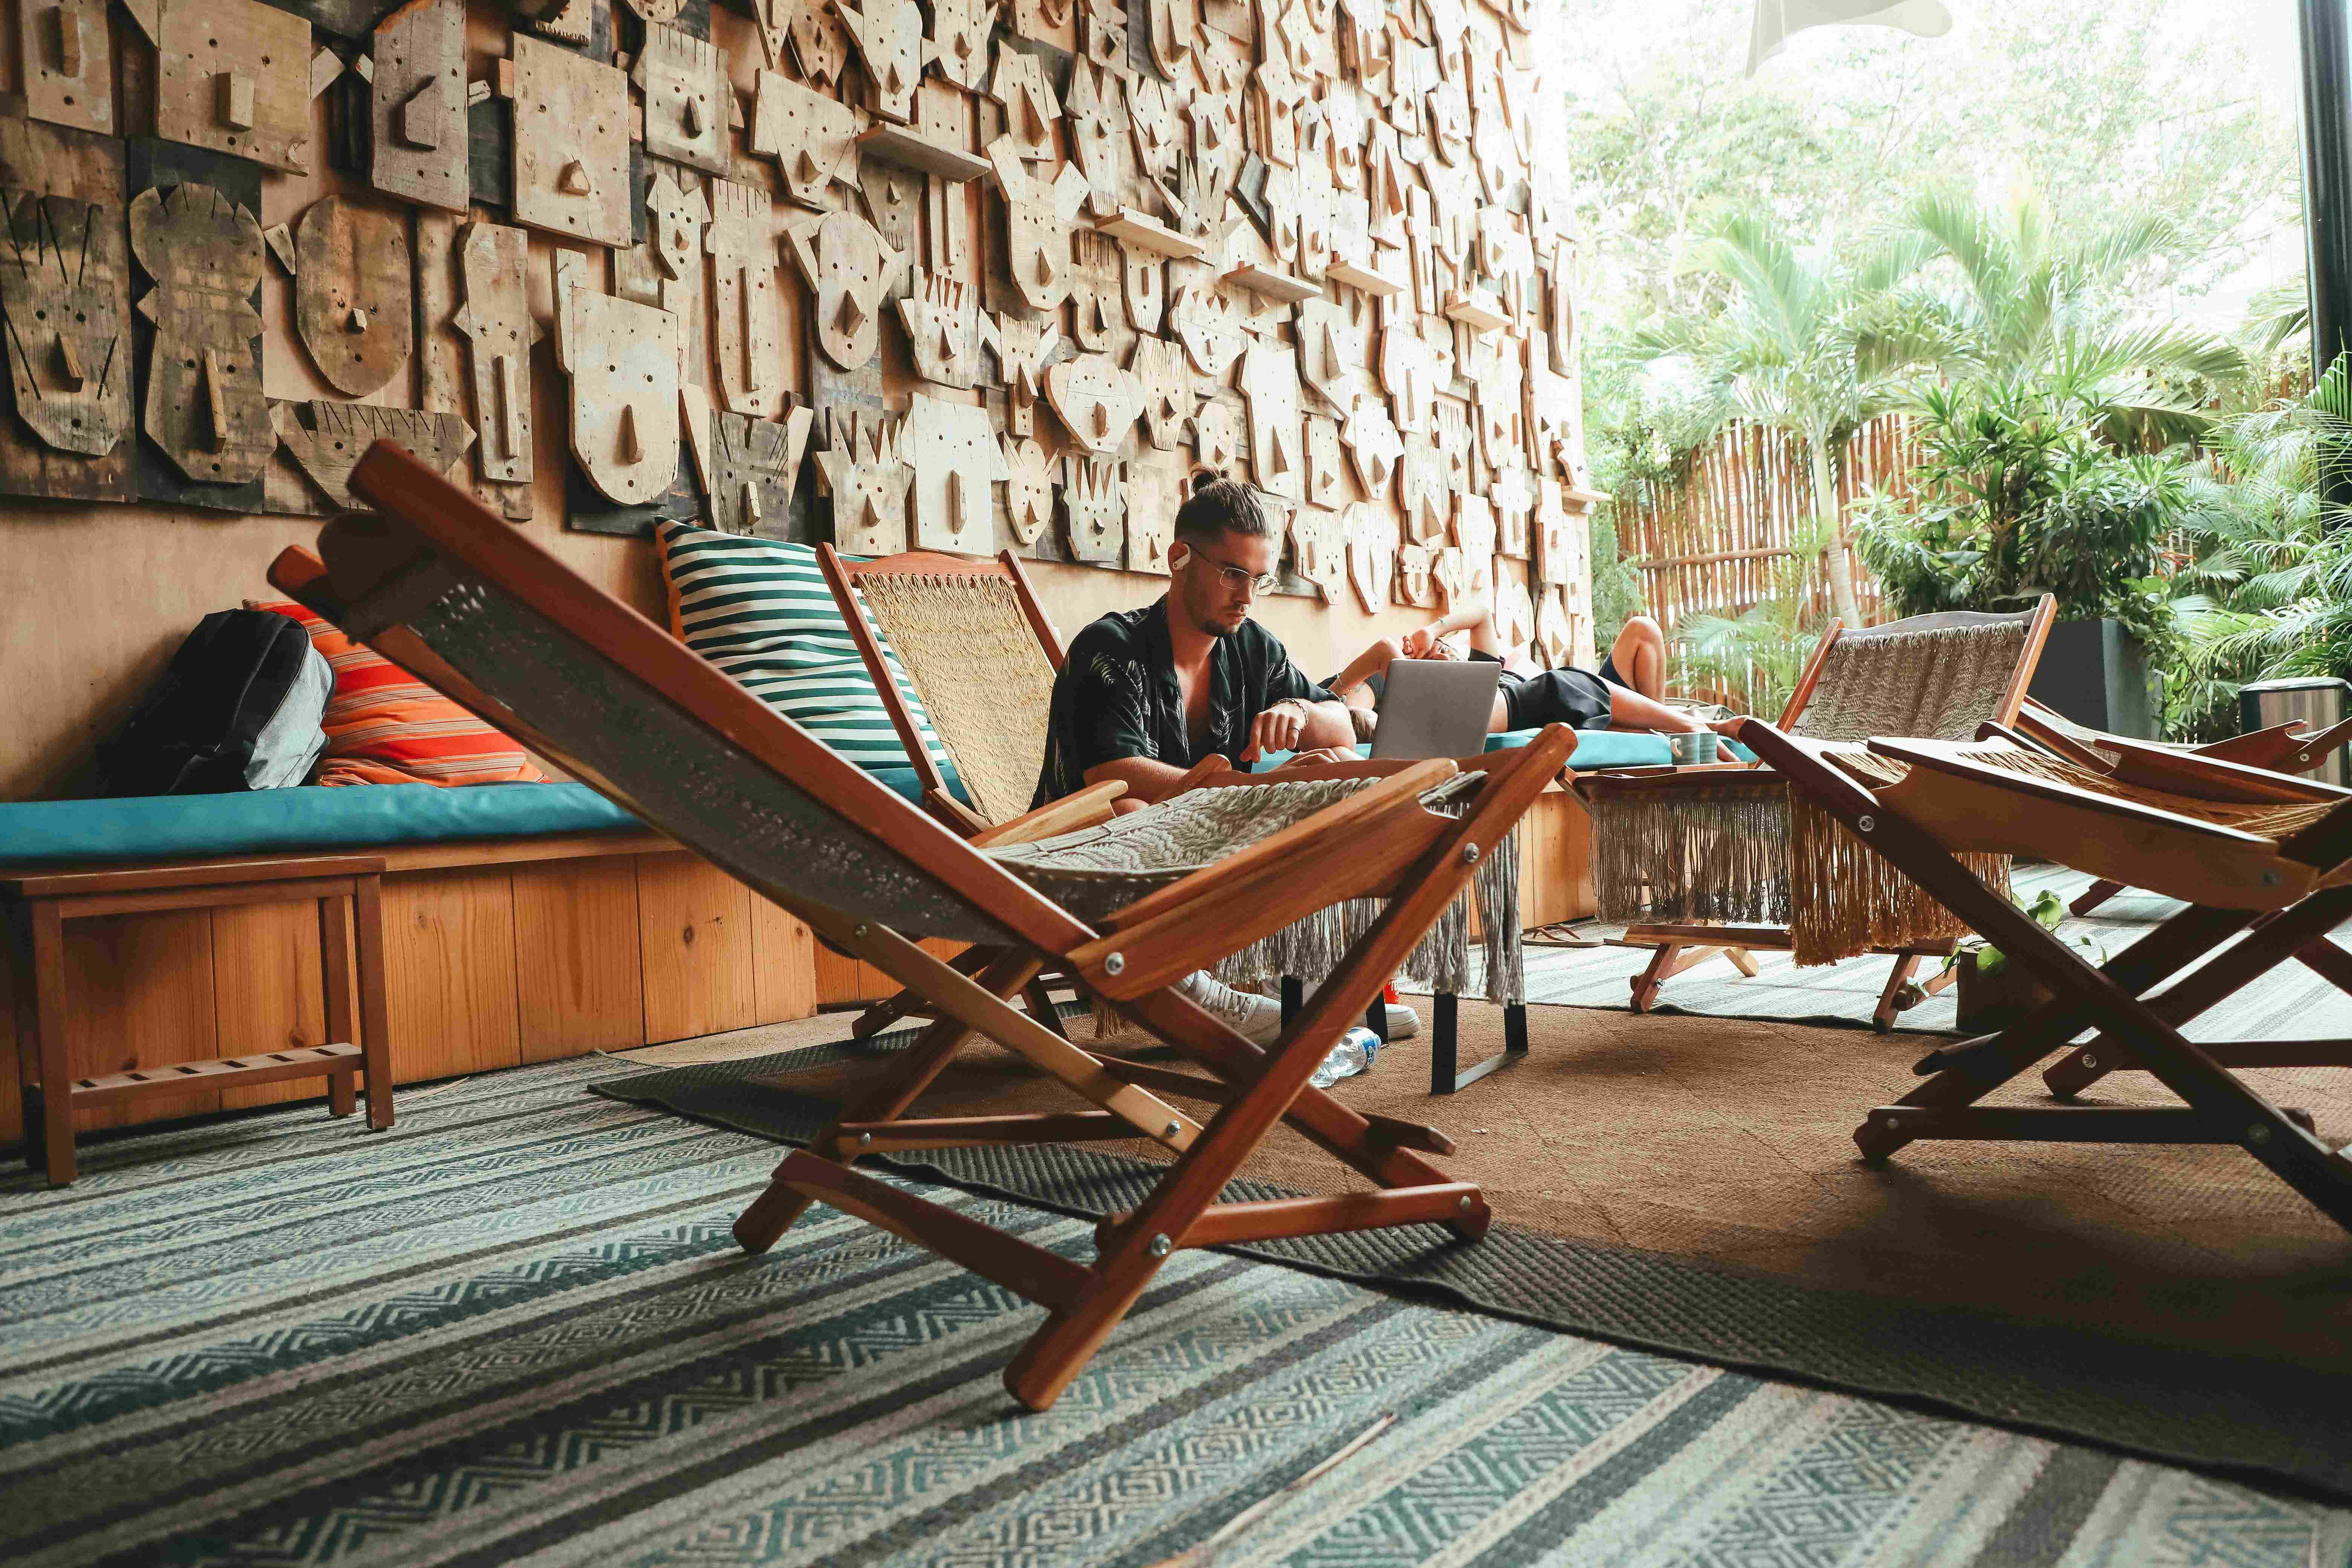 Workaway lifestyle in co-living spaces at Mayan Monkey